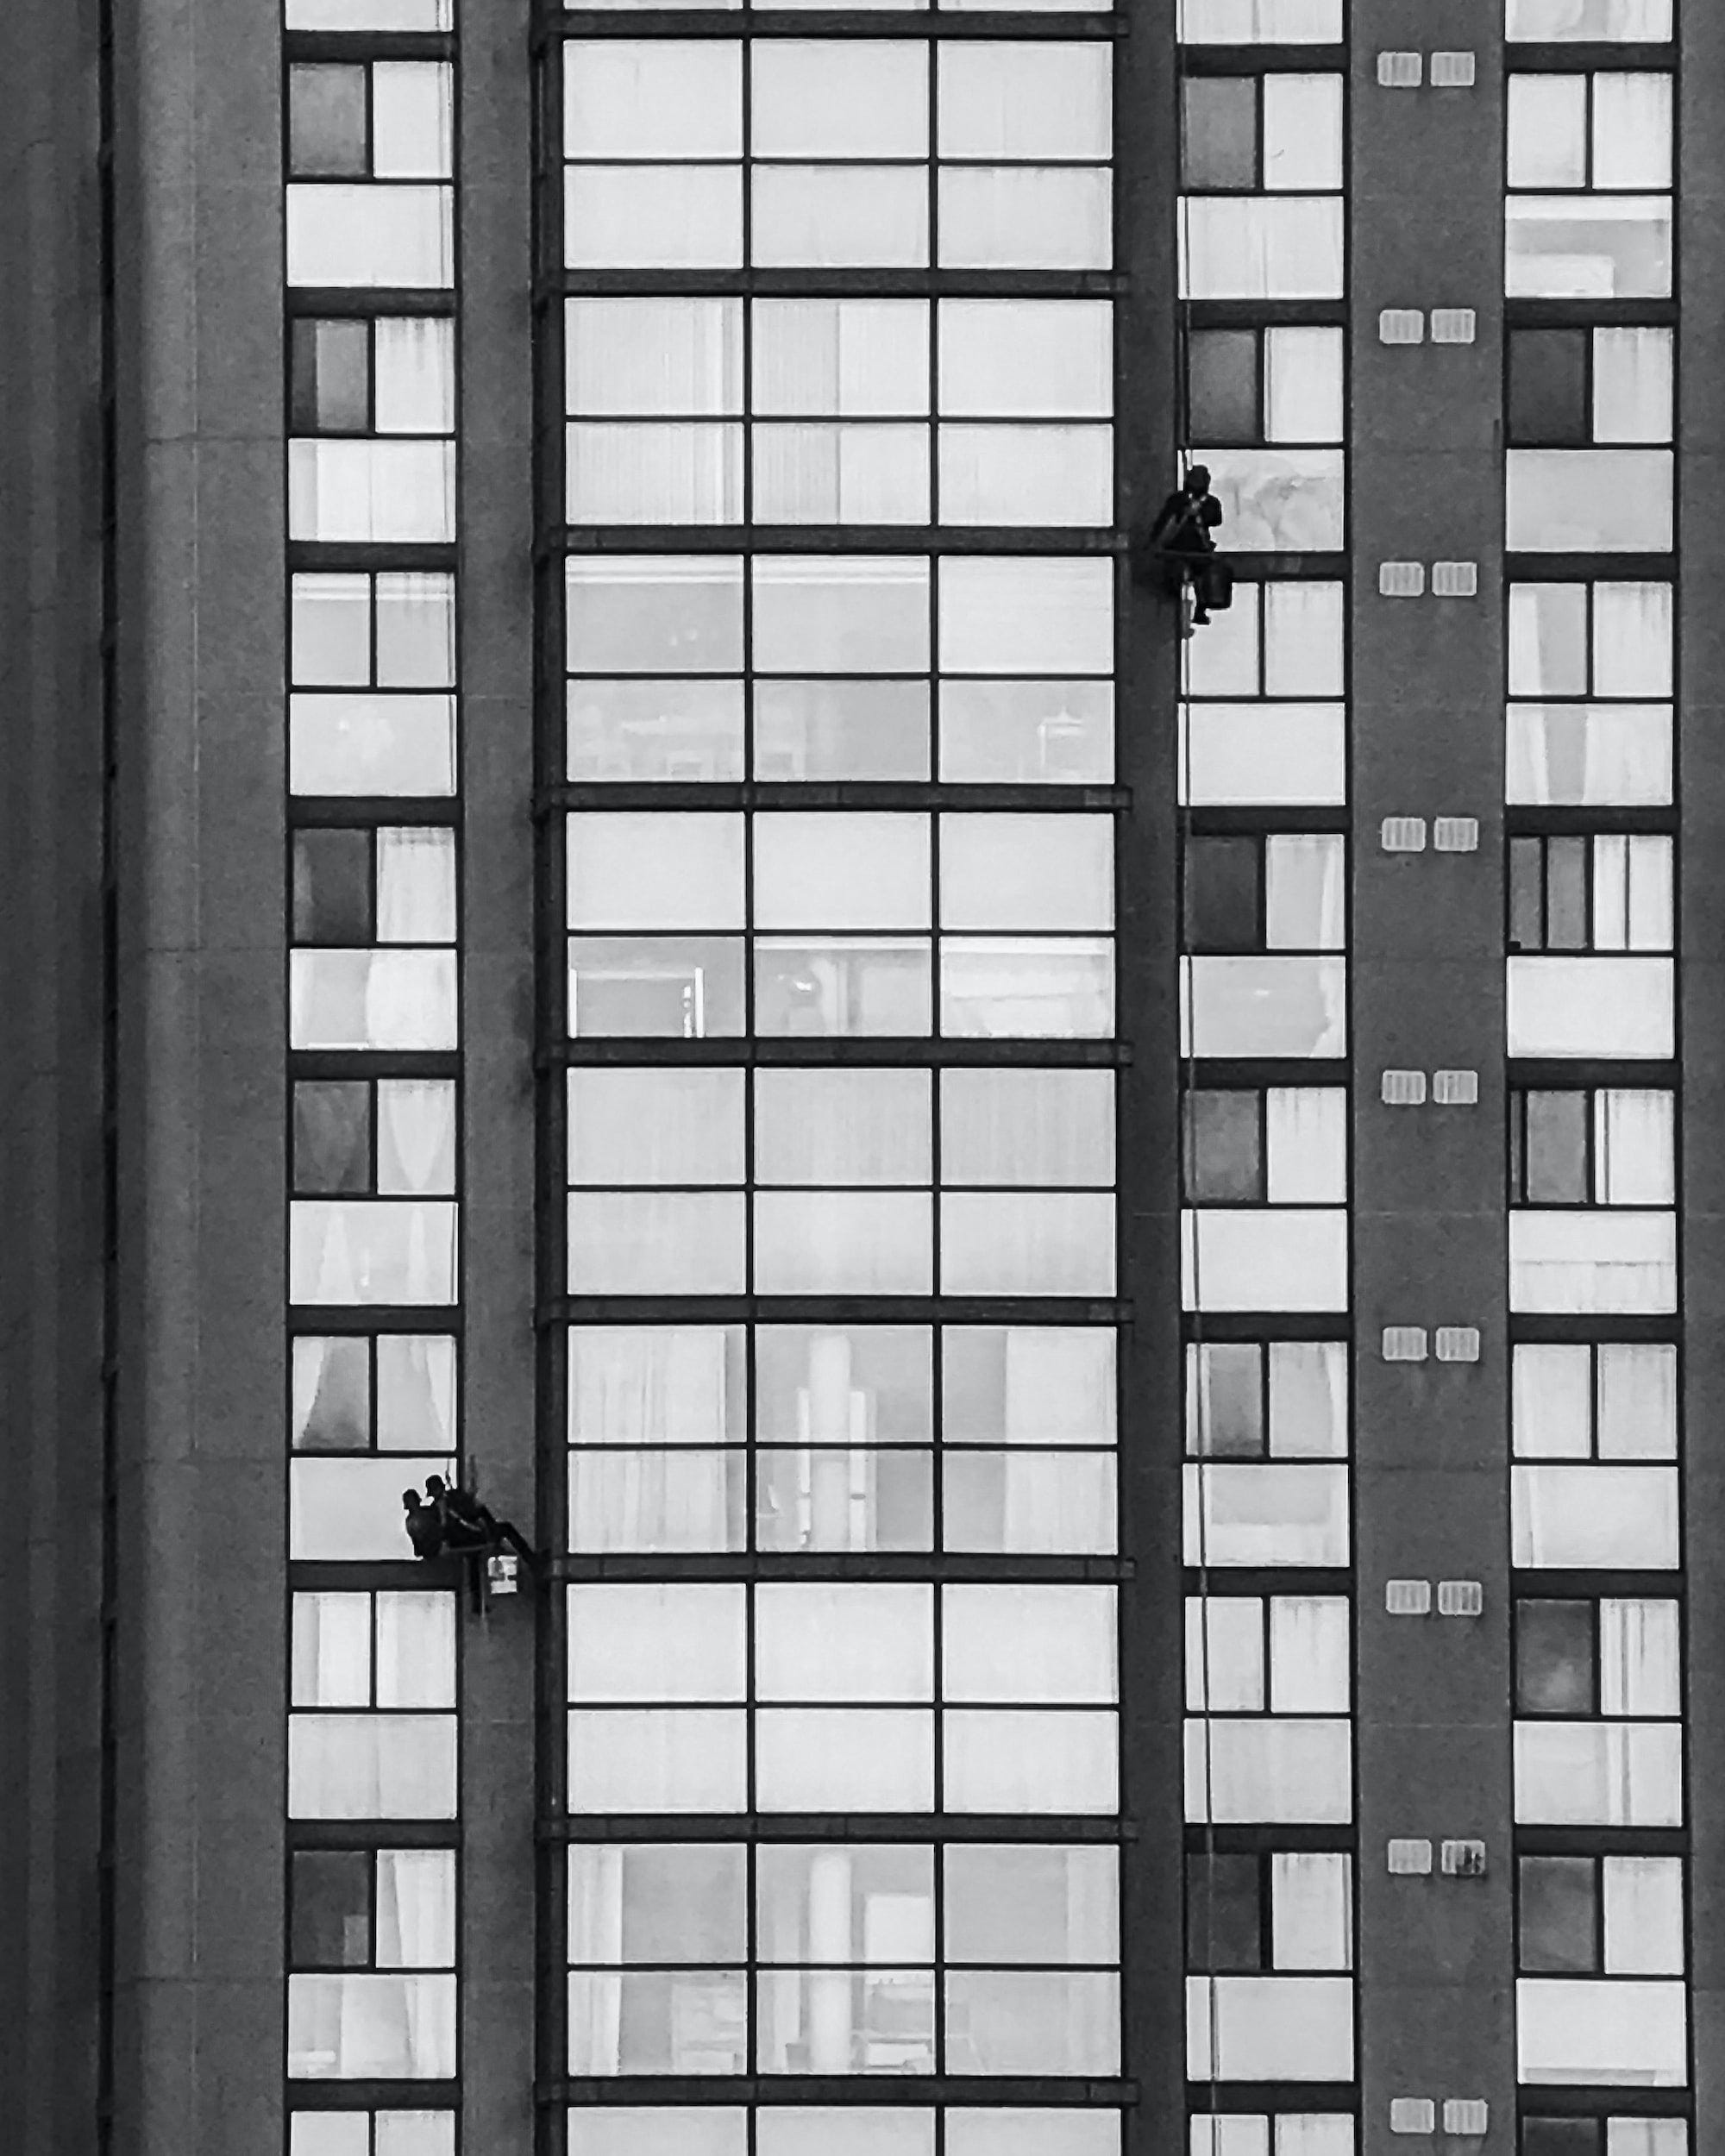 Window washers cleaning the windows of a high rise building.